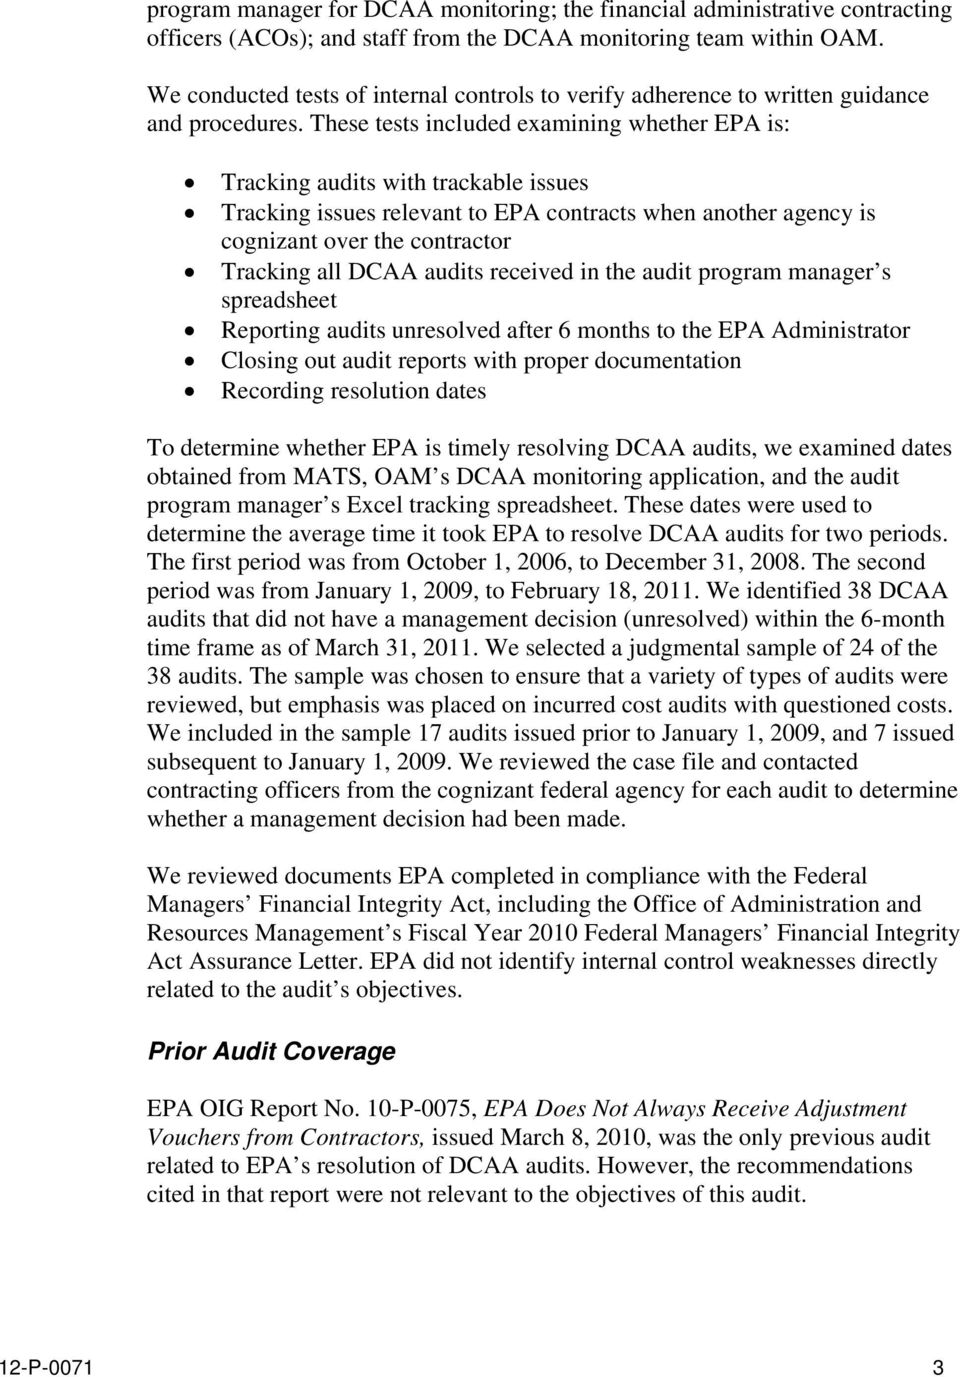 These tests included examining whether EPA is: Tracking audits with trackable issues Tracking issues relevant to EPA contracts when another agency is cognizant over the contractor Tracking all DCAA